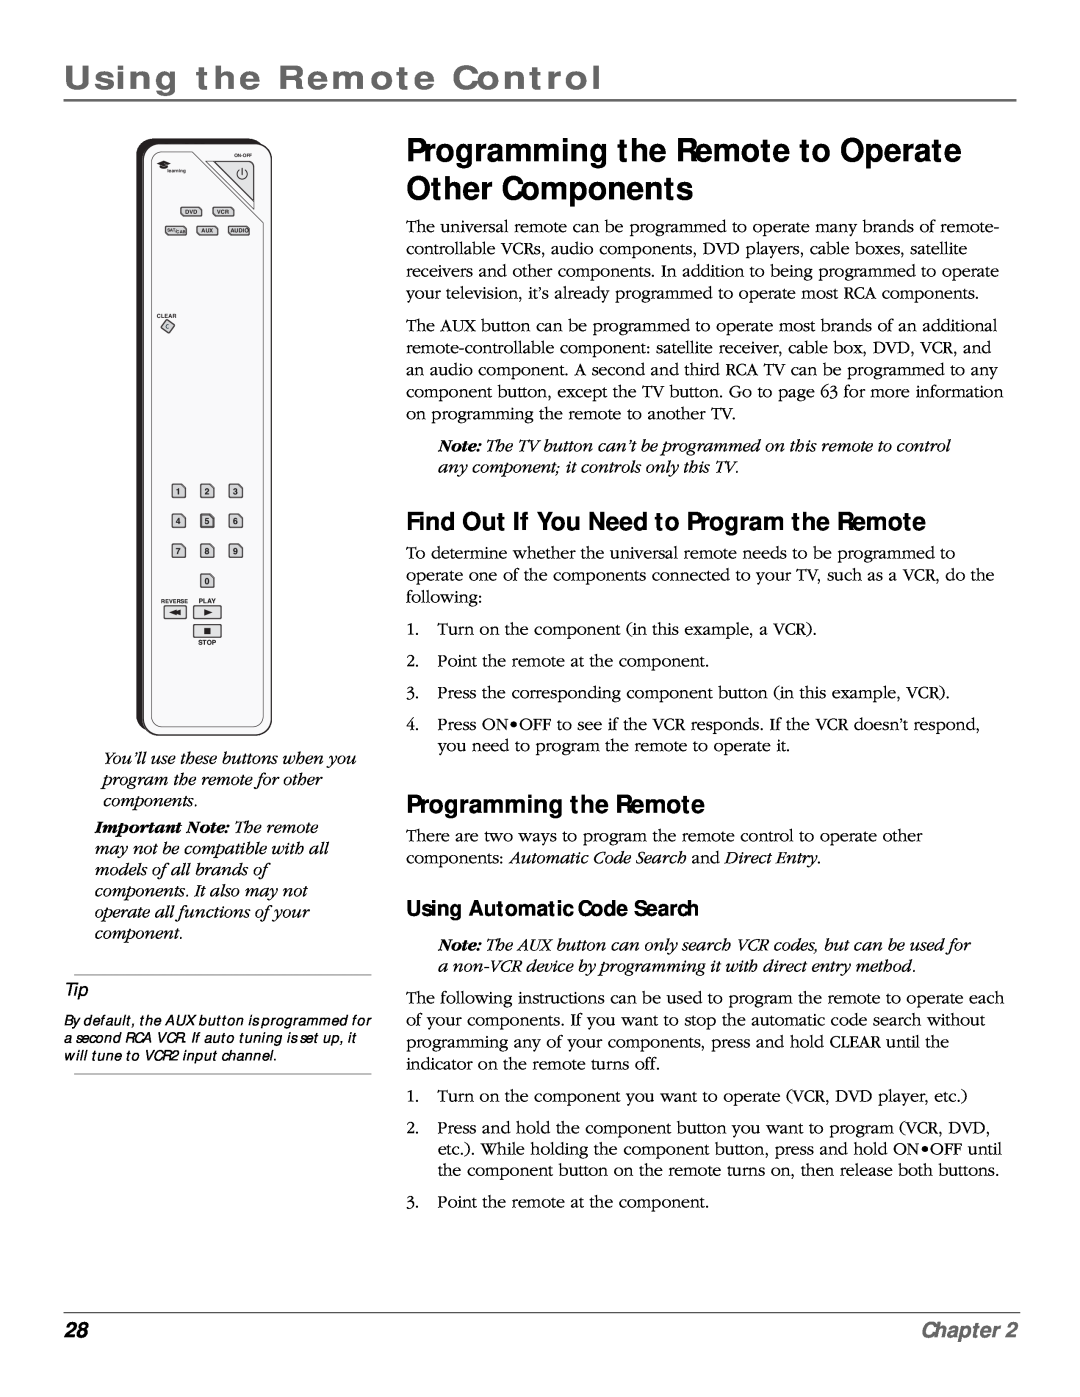 RCA scenium manual Programming the Remote to Operate Other Components, Find Out If You Need to Program the Remote, Chapter 